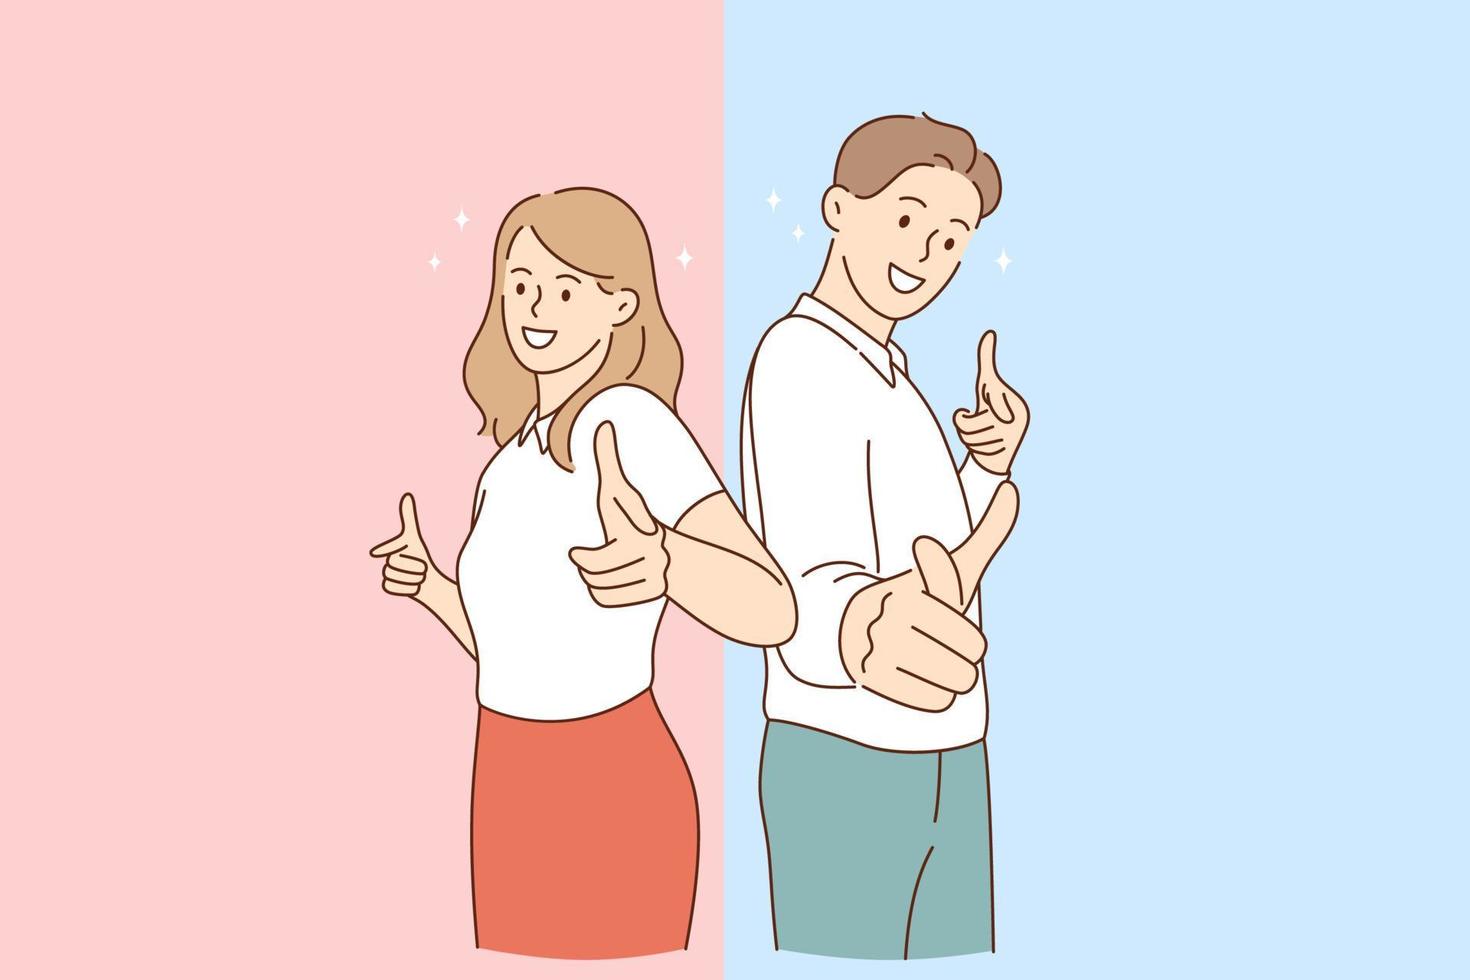 Positive emotions and good vibes concept. Young smiling cheerful couple woman and man cartoon characters standing pointing at camera showing thumbs up sign vector illustration